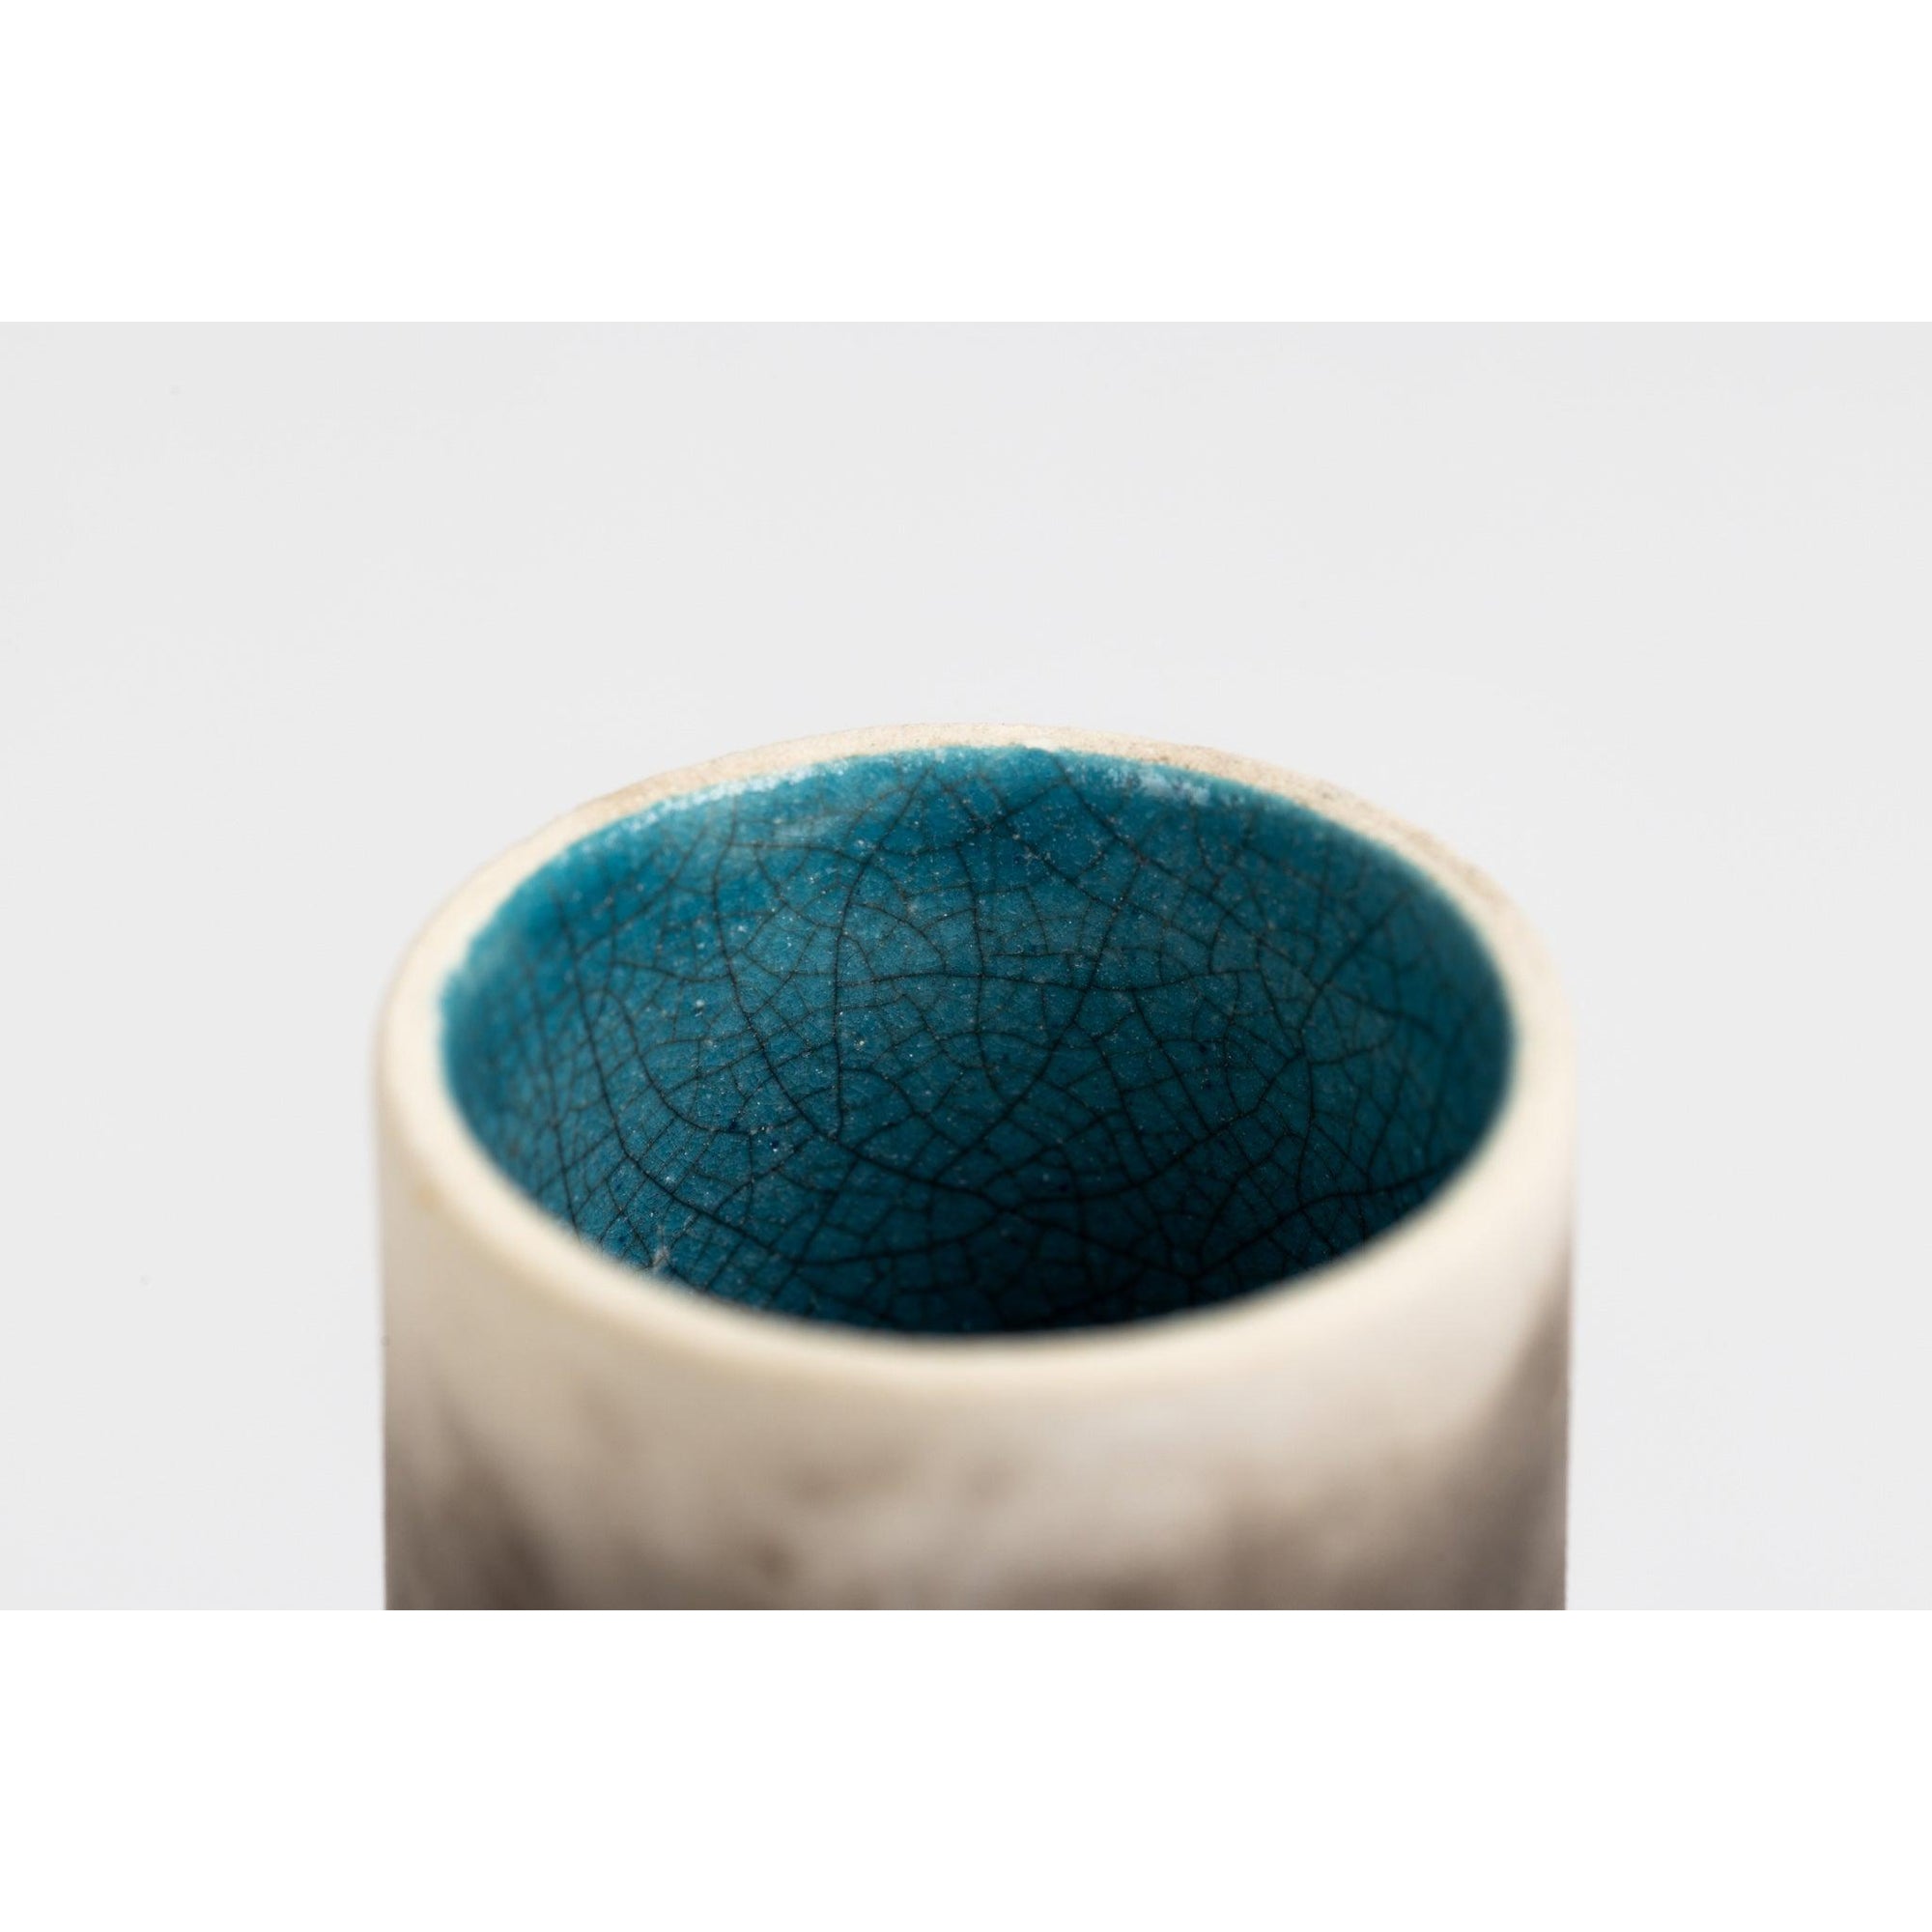 KSZ1 Raku Vessel by Kate Schuricht, available at Padstow Gallery, Cornwall